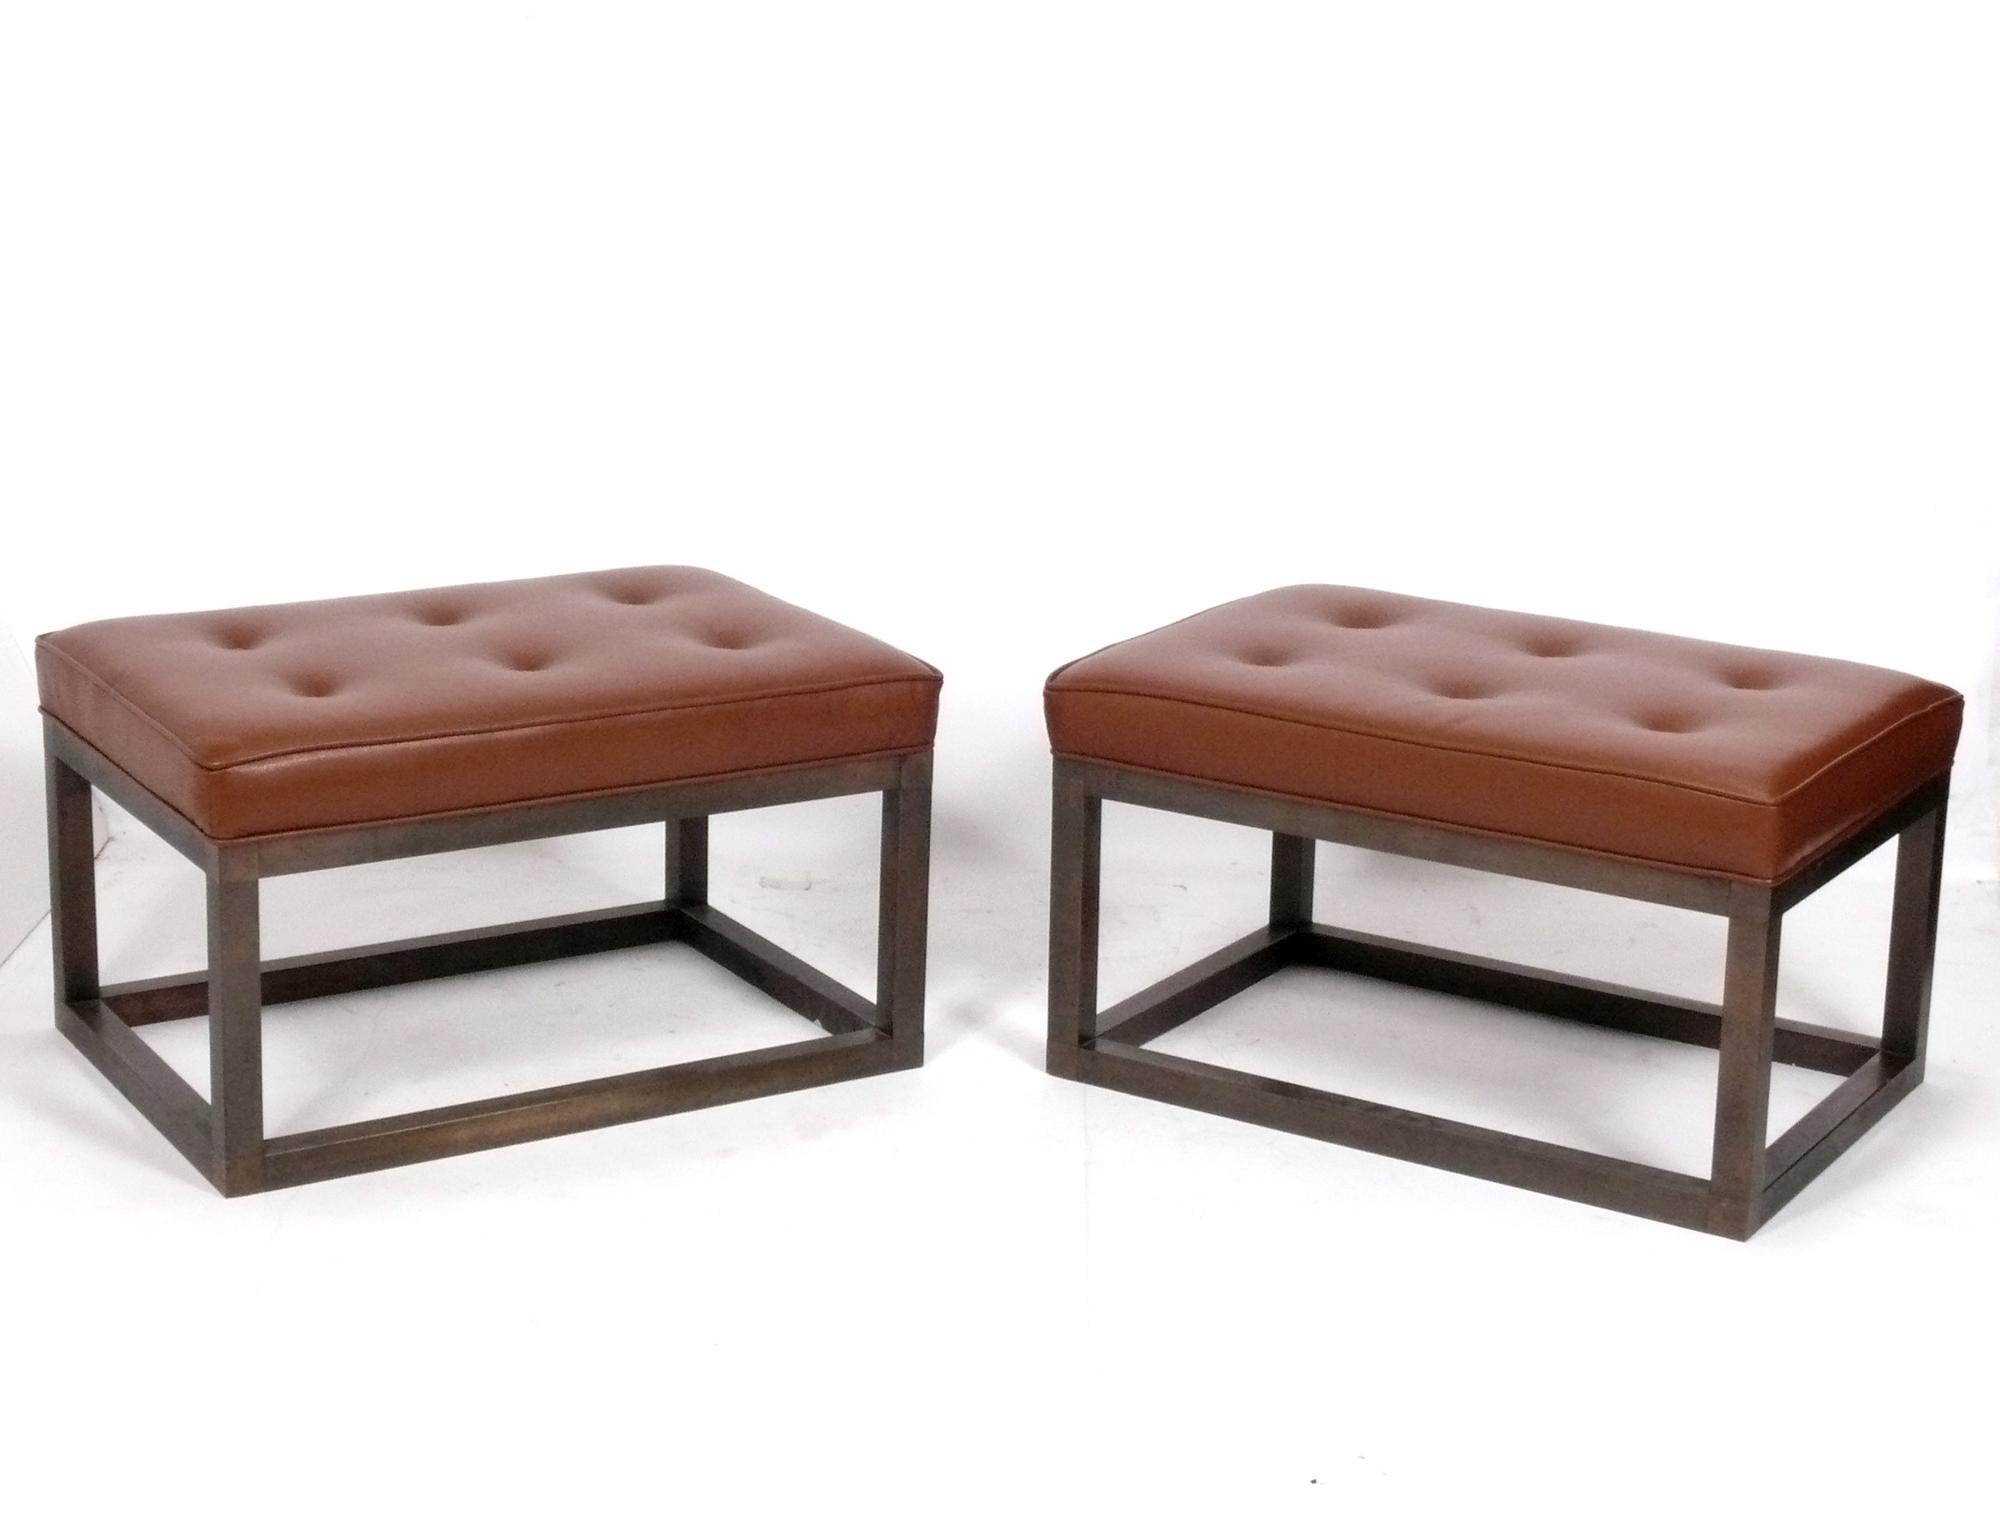 Cognac Color Leather and Bronzed Finish Metal Benches, American, circa 1980s. They have recently been reupholstered in a supple cognac color leather and are ready to use. They are a versatile size and can be used individually as stools or end